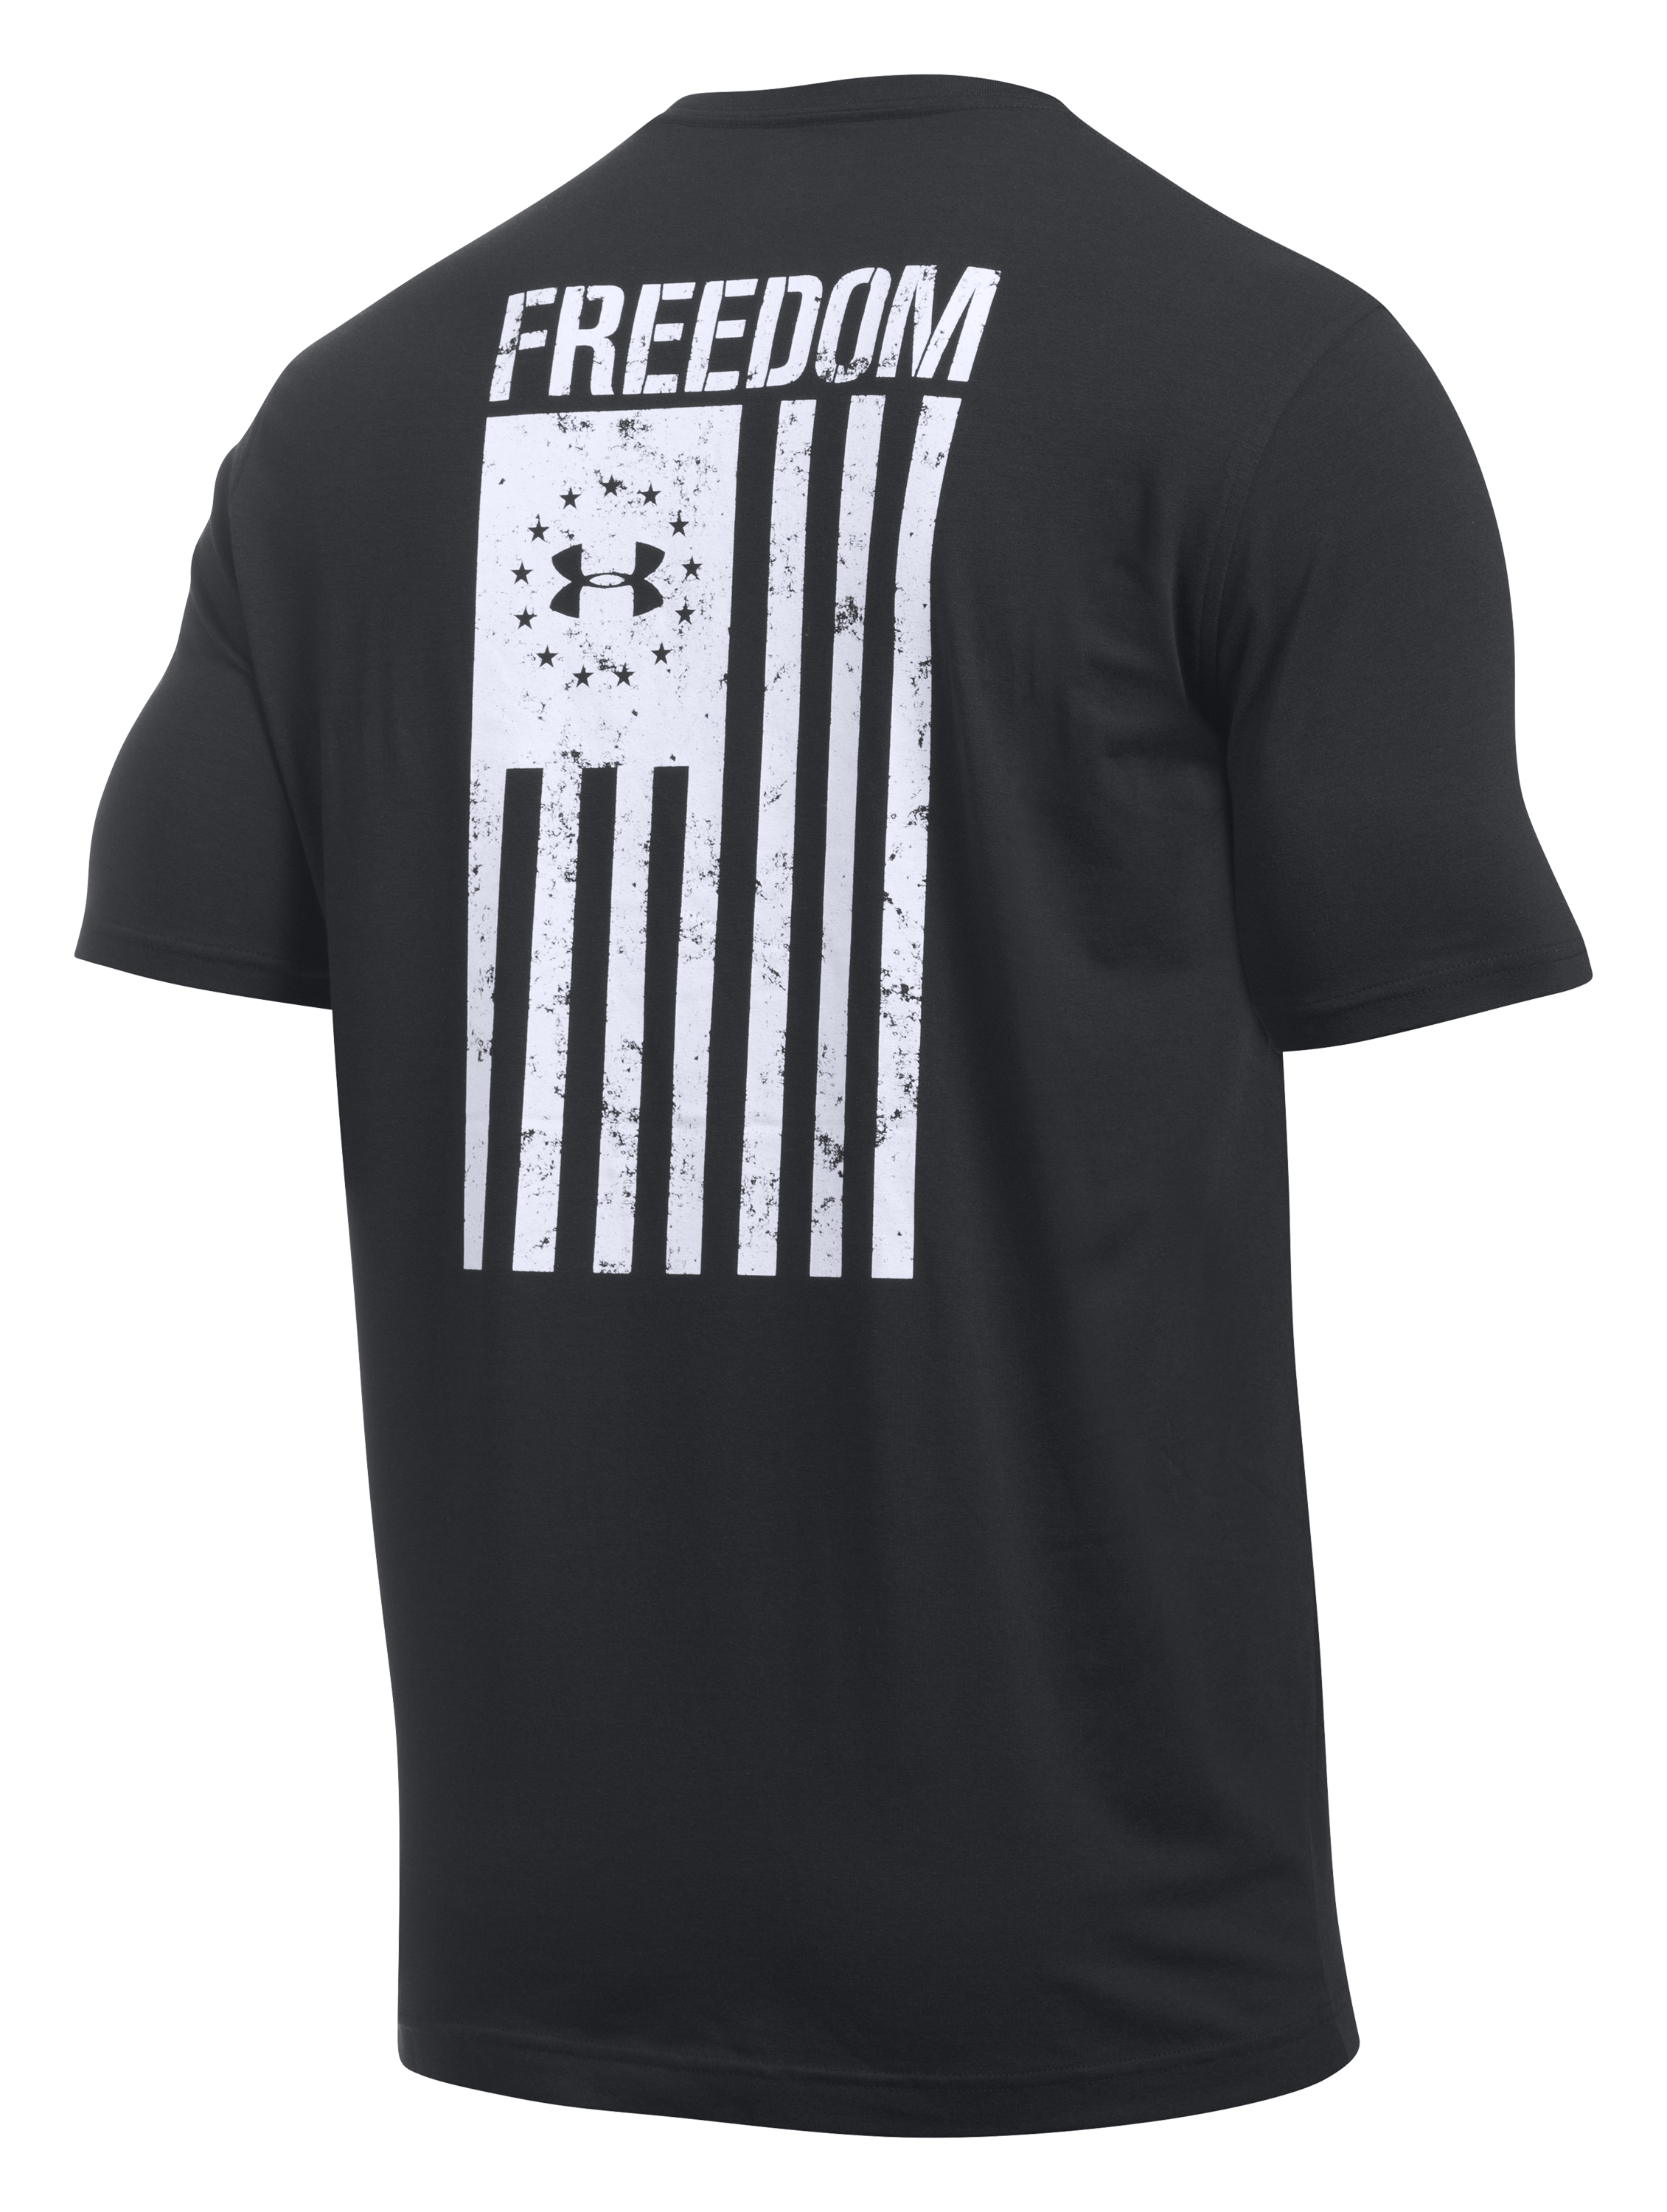 Under Armour Women's New Freedom Flag T-Shirt